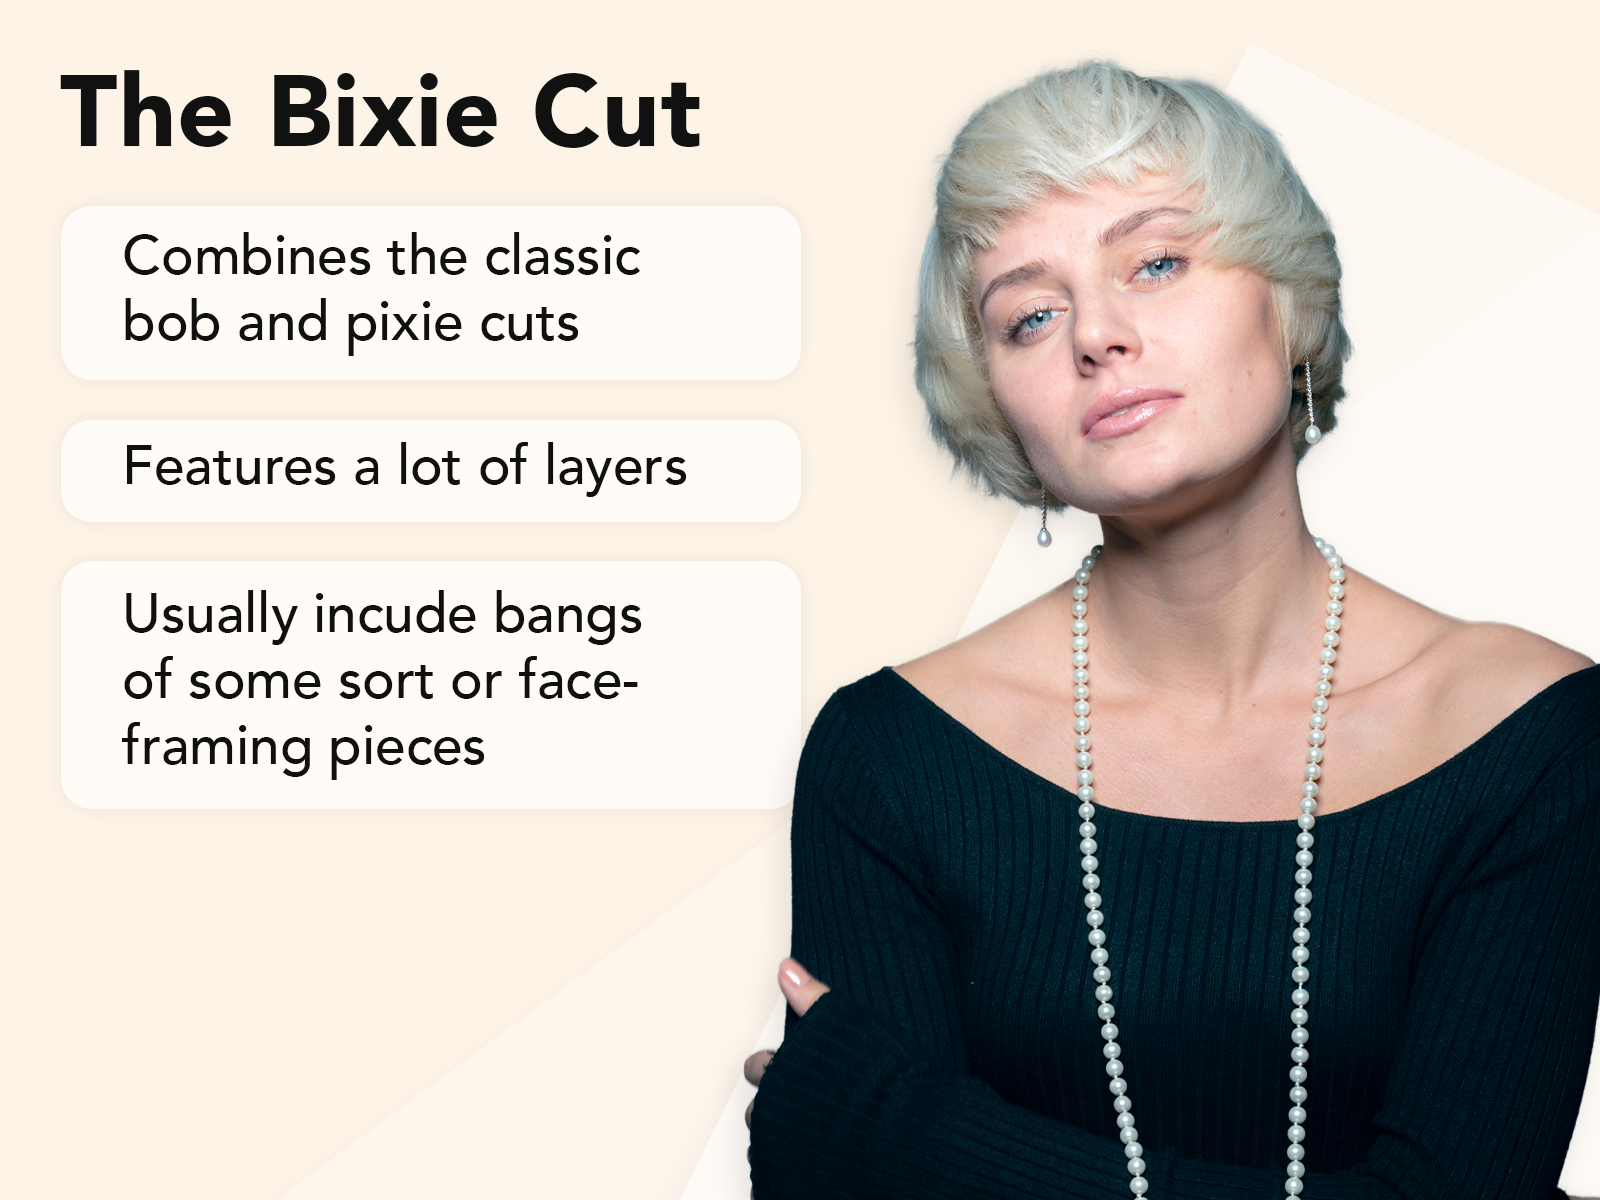 What Is a Bixie Cut explainer image on a tan background